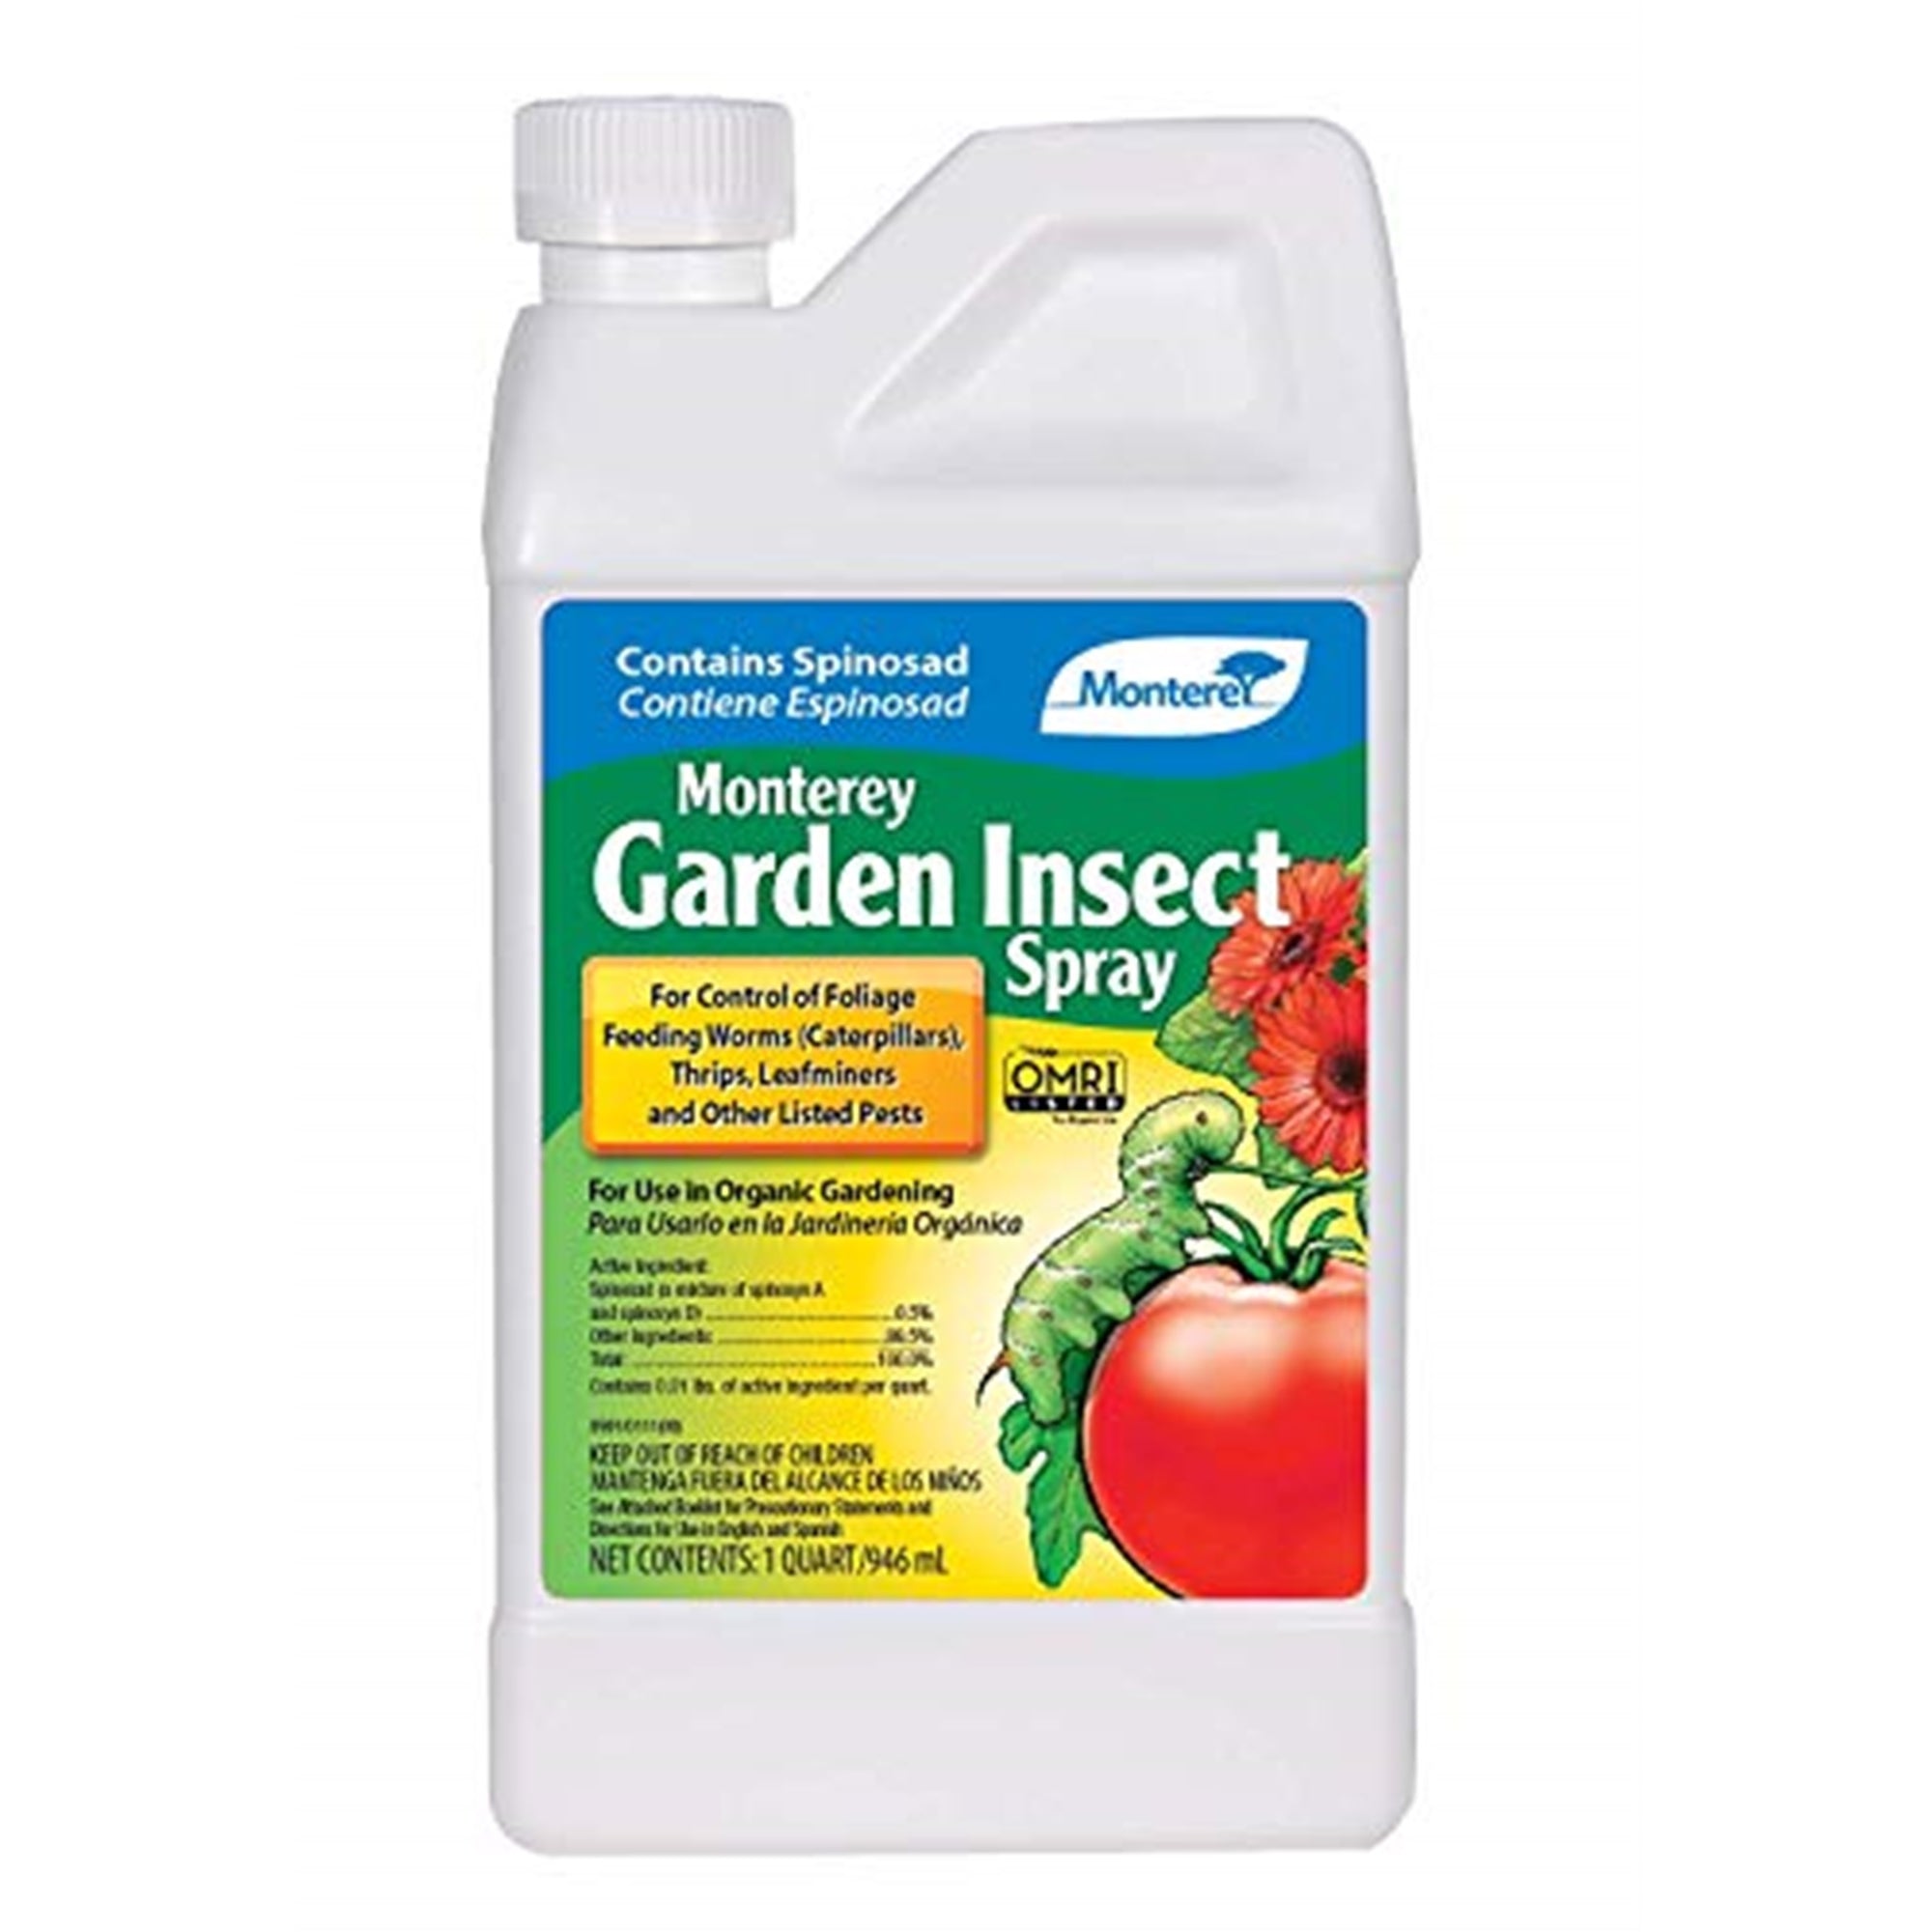 Monterey Garden Insect Spray, Insecticide & Pesticide with Spinosad Concentrate, 32 oz